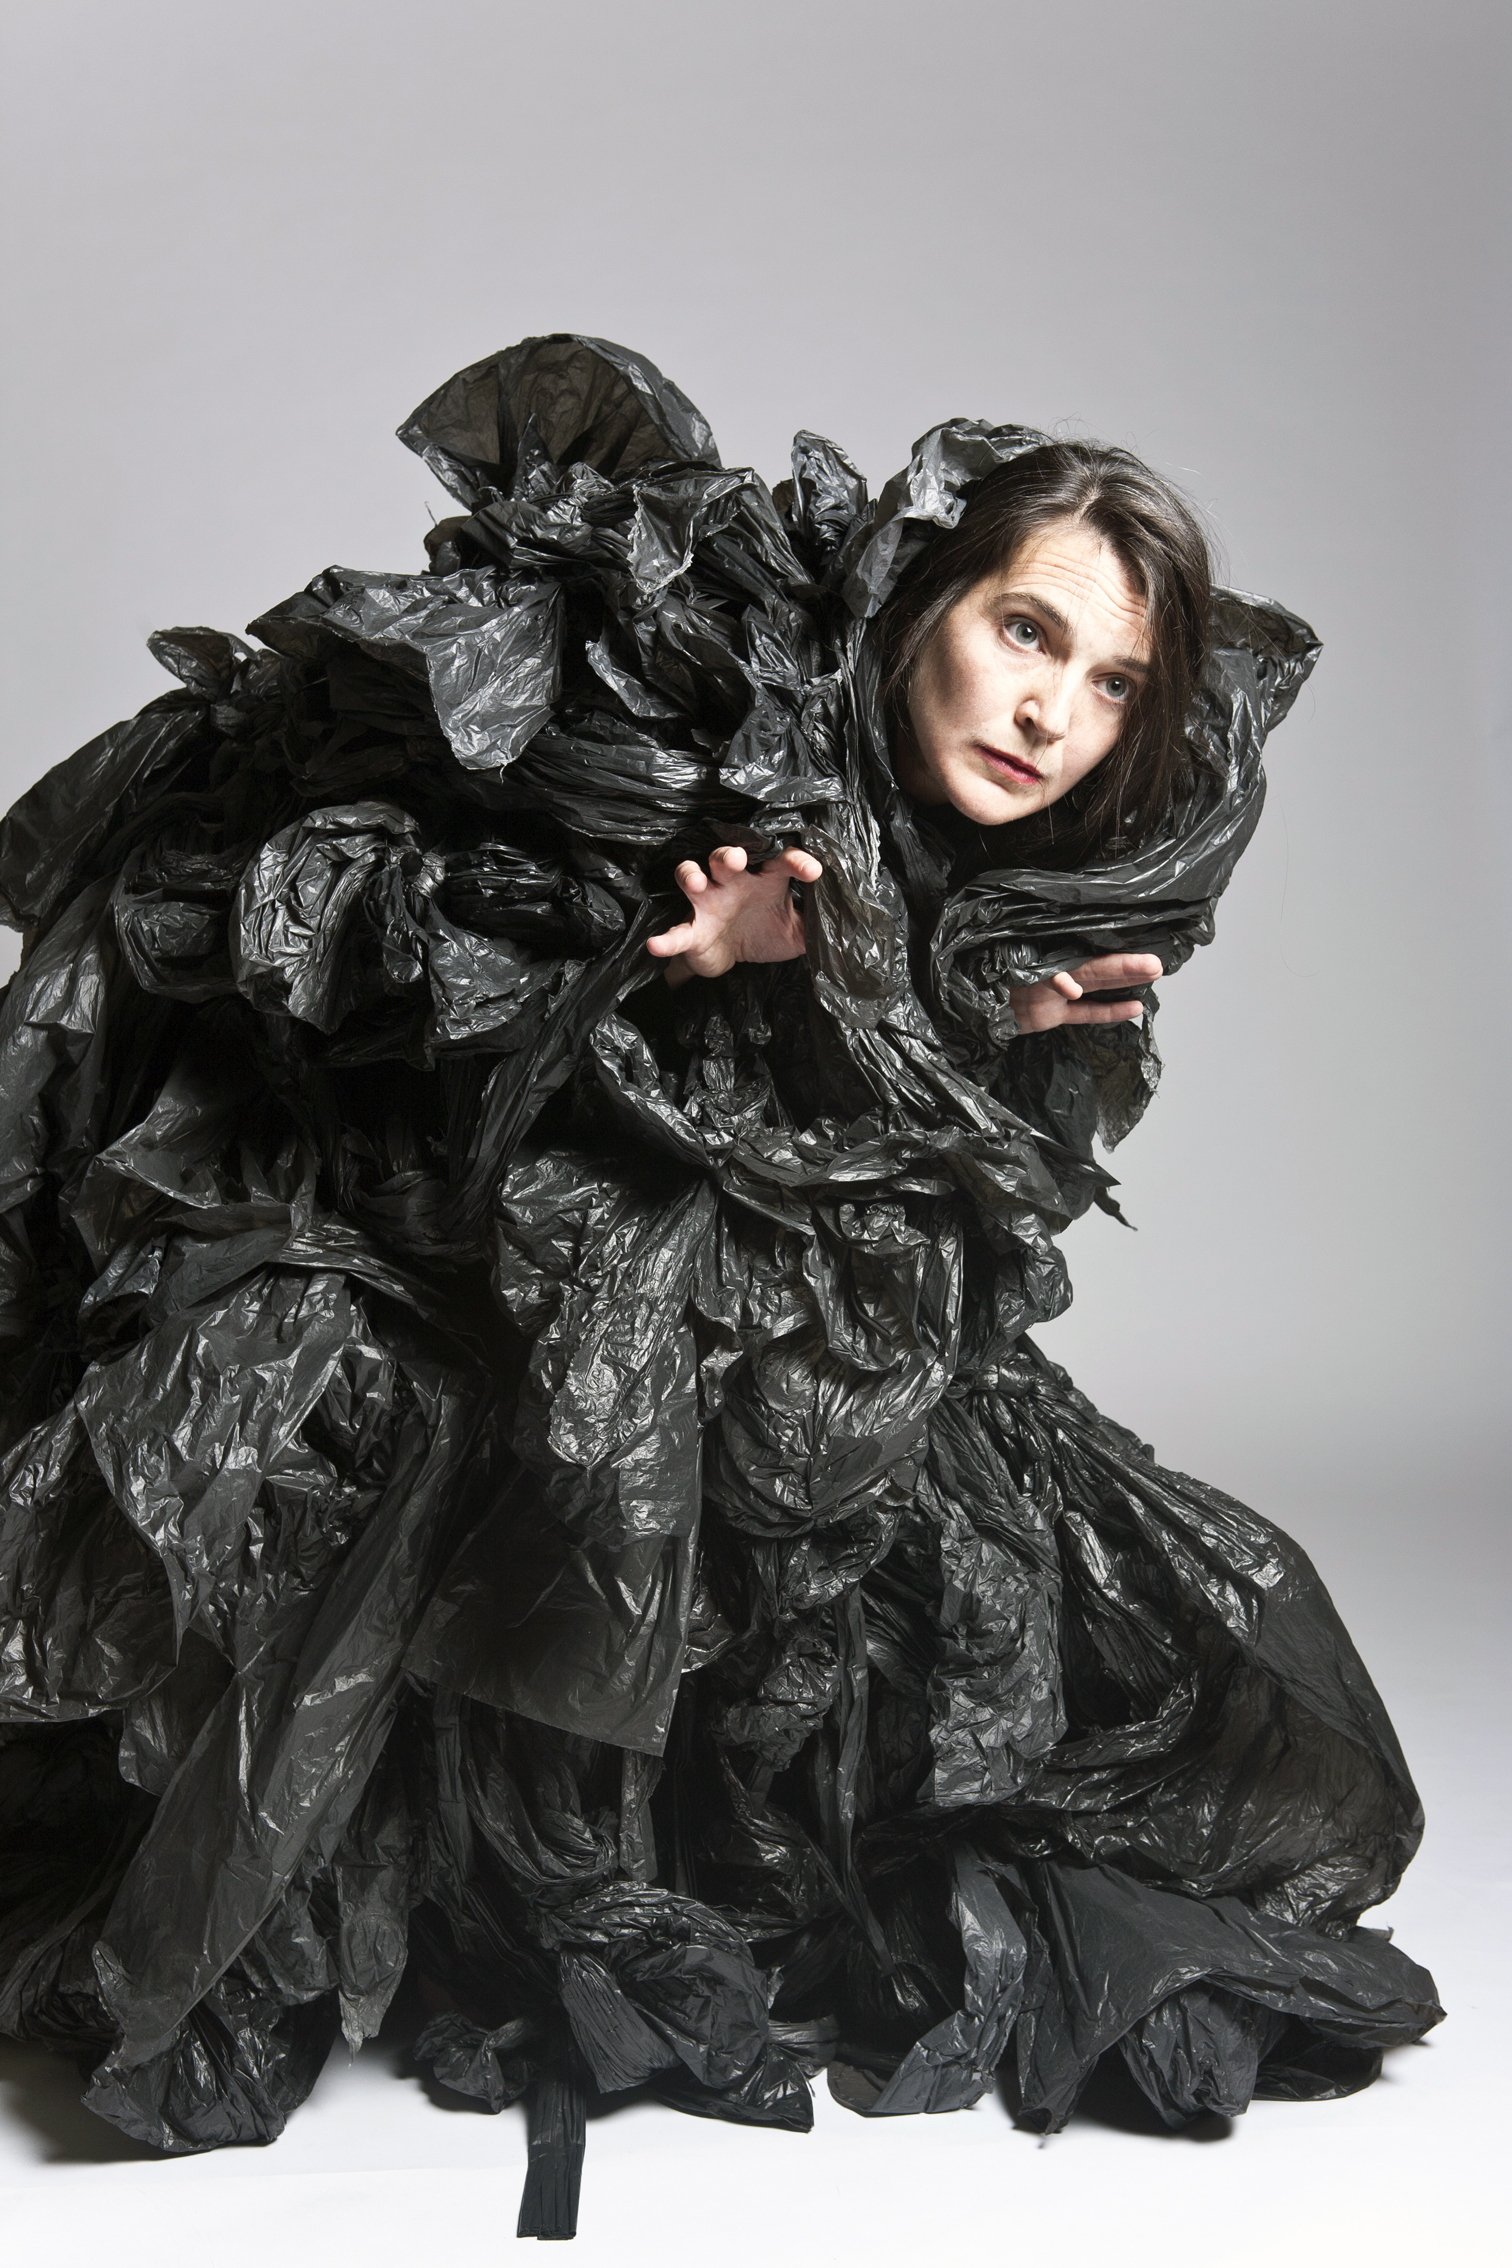 solo mover in a costume of garbage bags